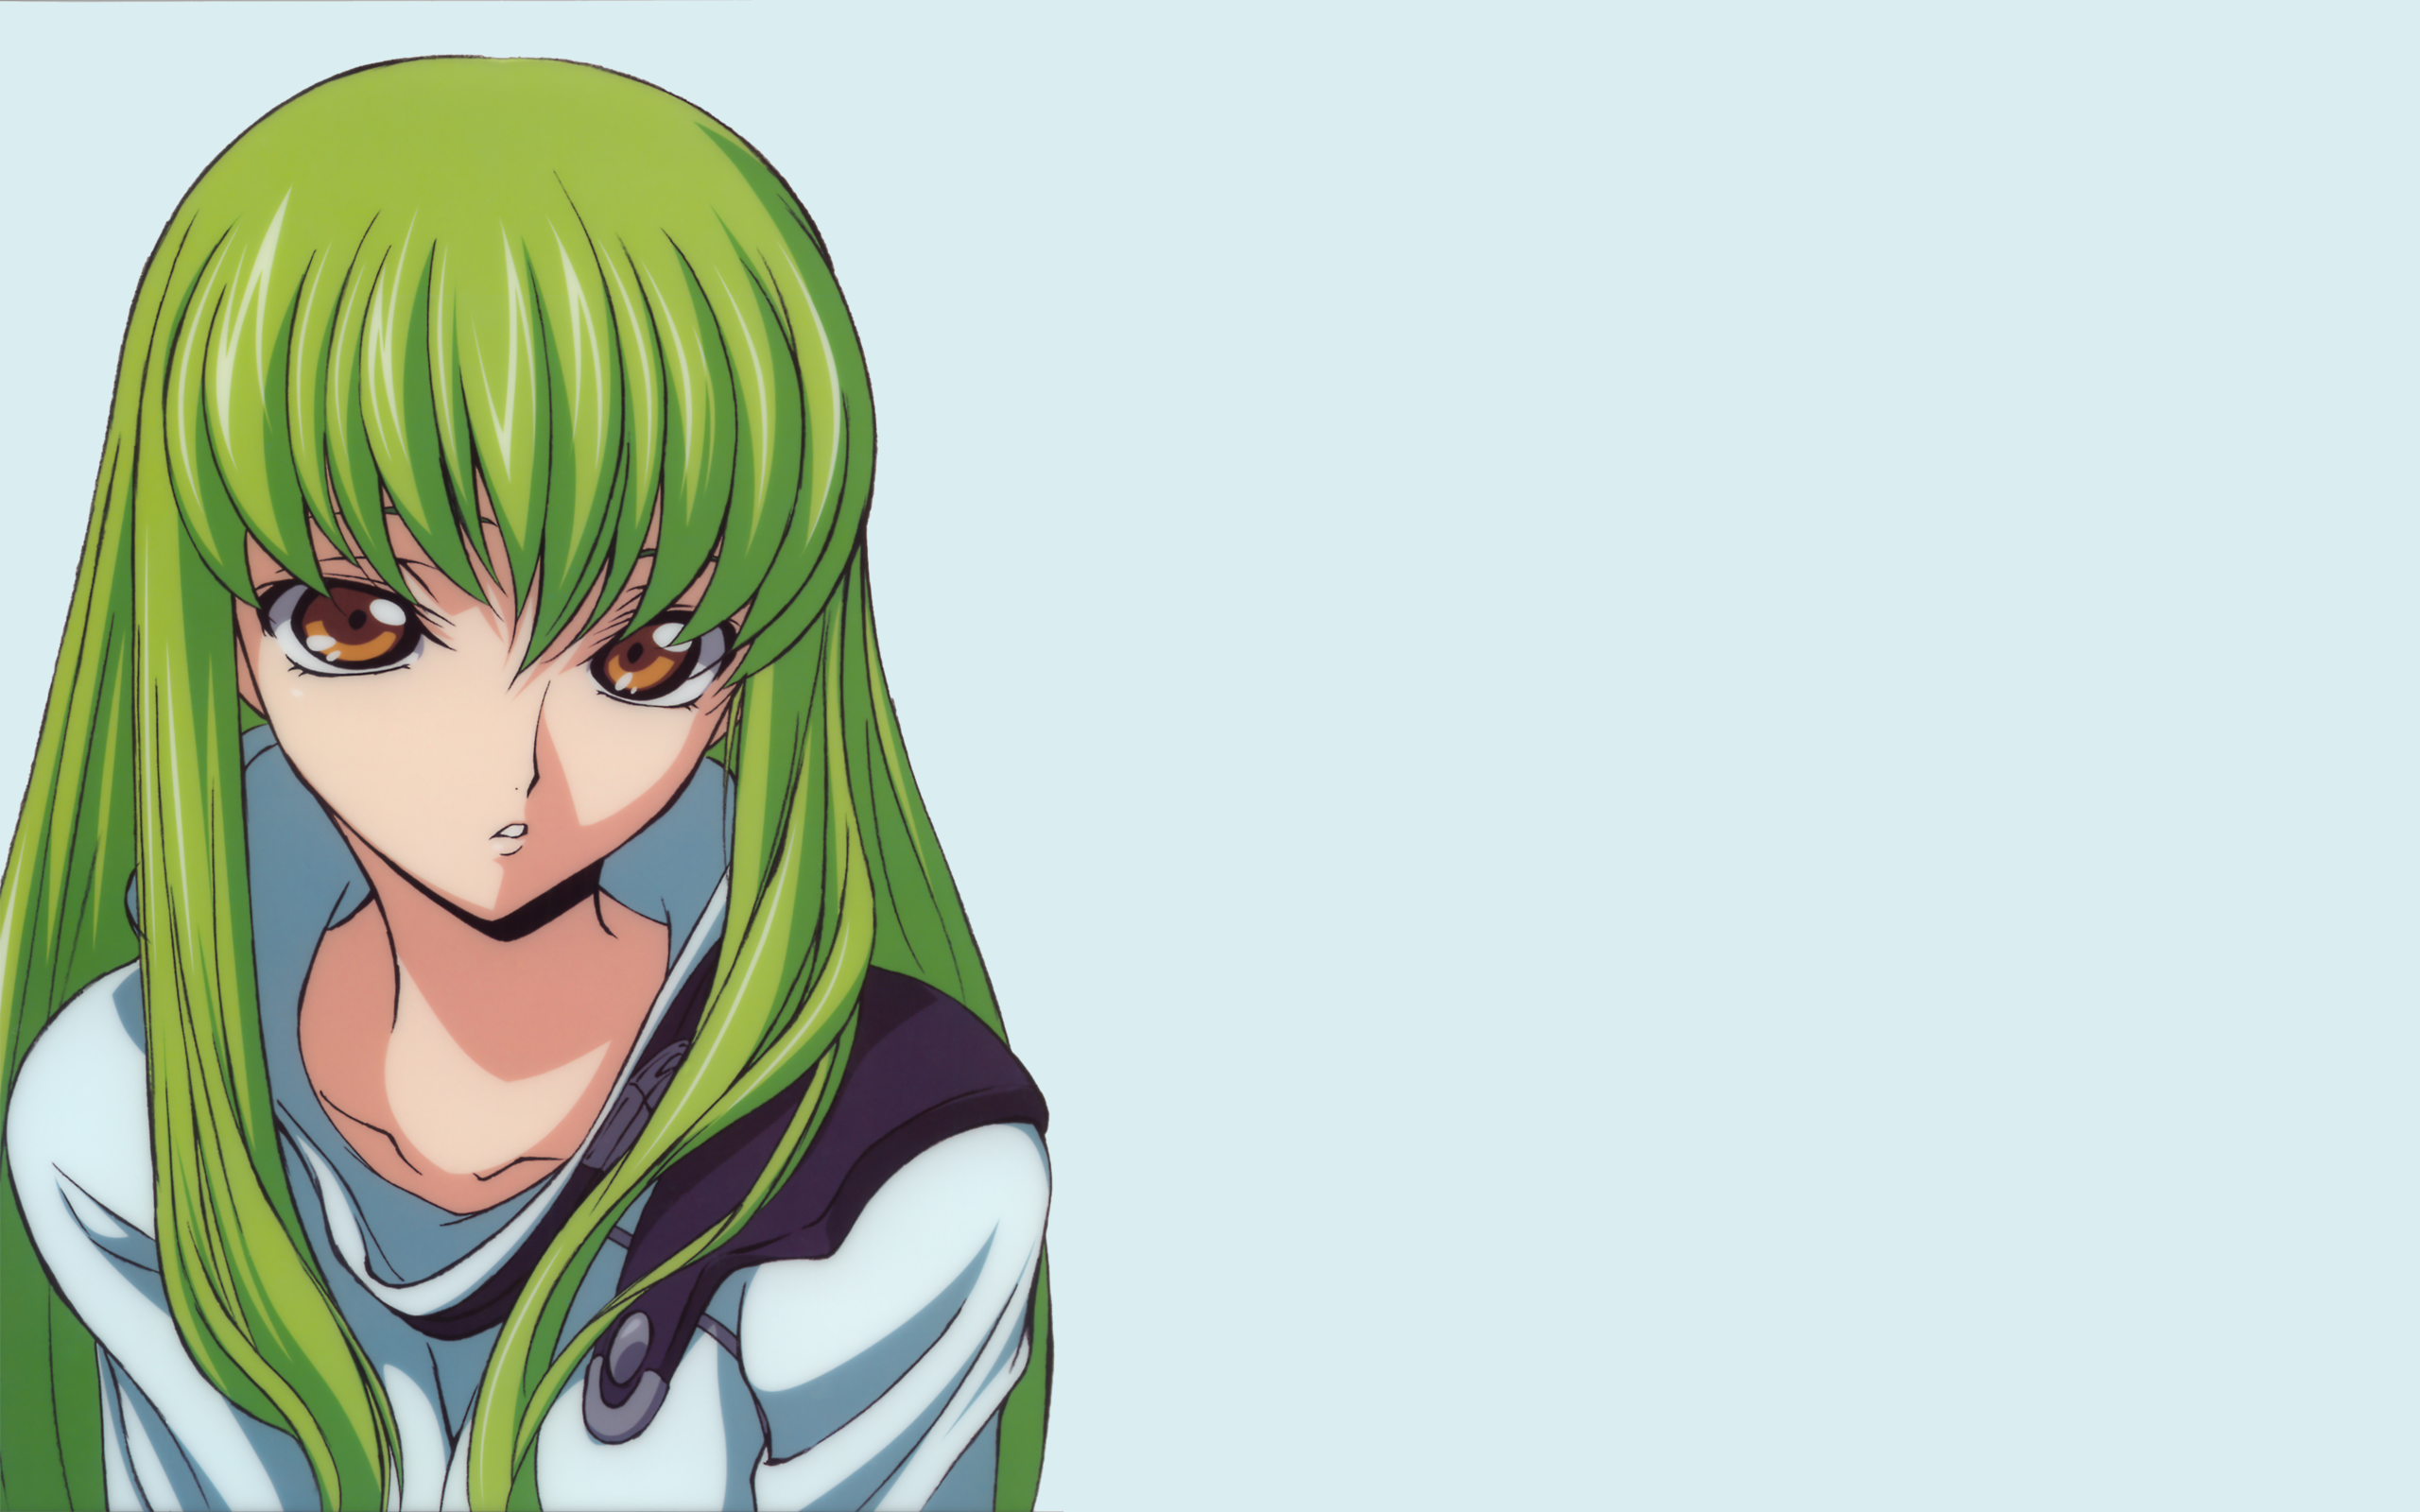 C.C. from Code Geass with green hair.